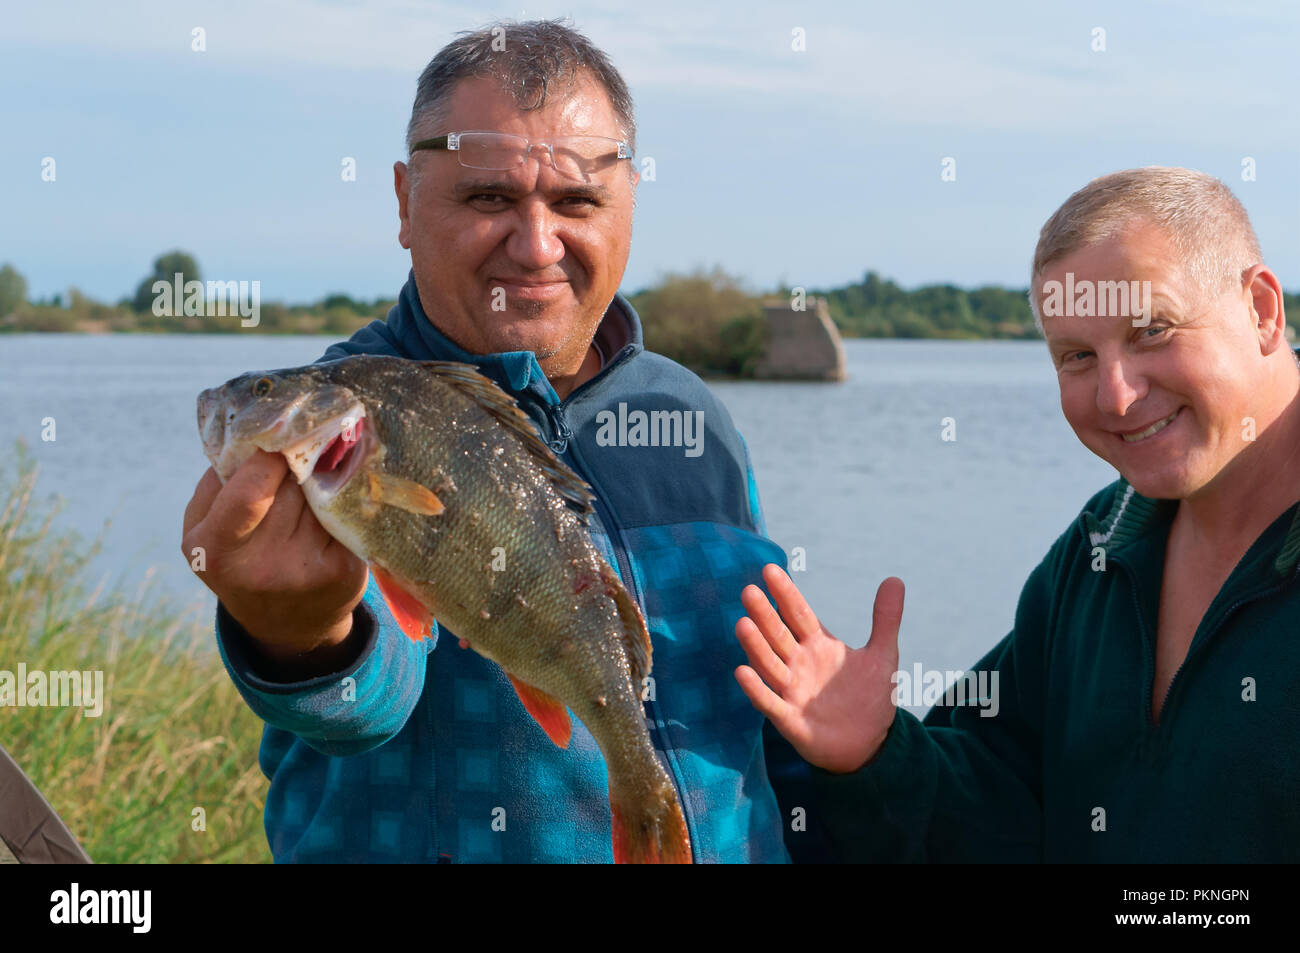 Kaliningrad region, Russia, August 19, 2018, two fishermen caught a perch, a man shows a fish catch Stock Photo